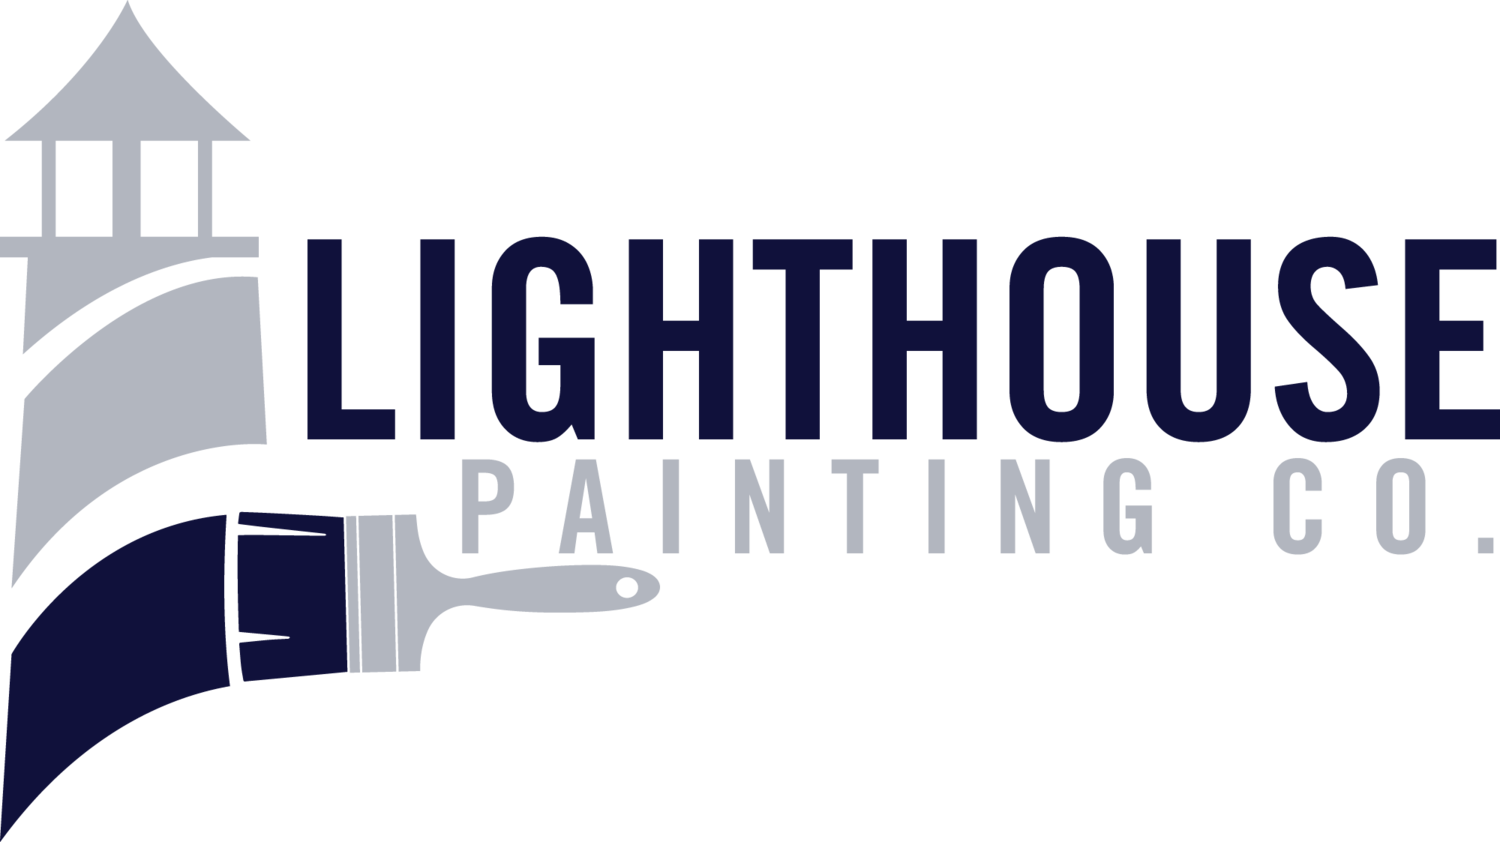 Lighthouse Painting Co.